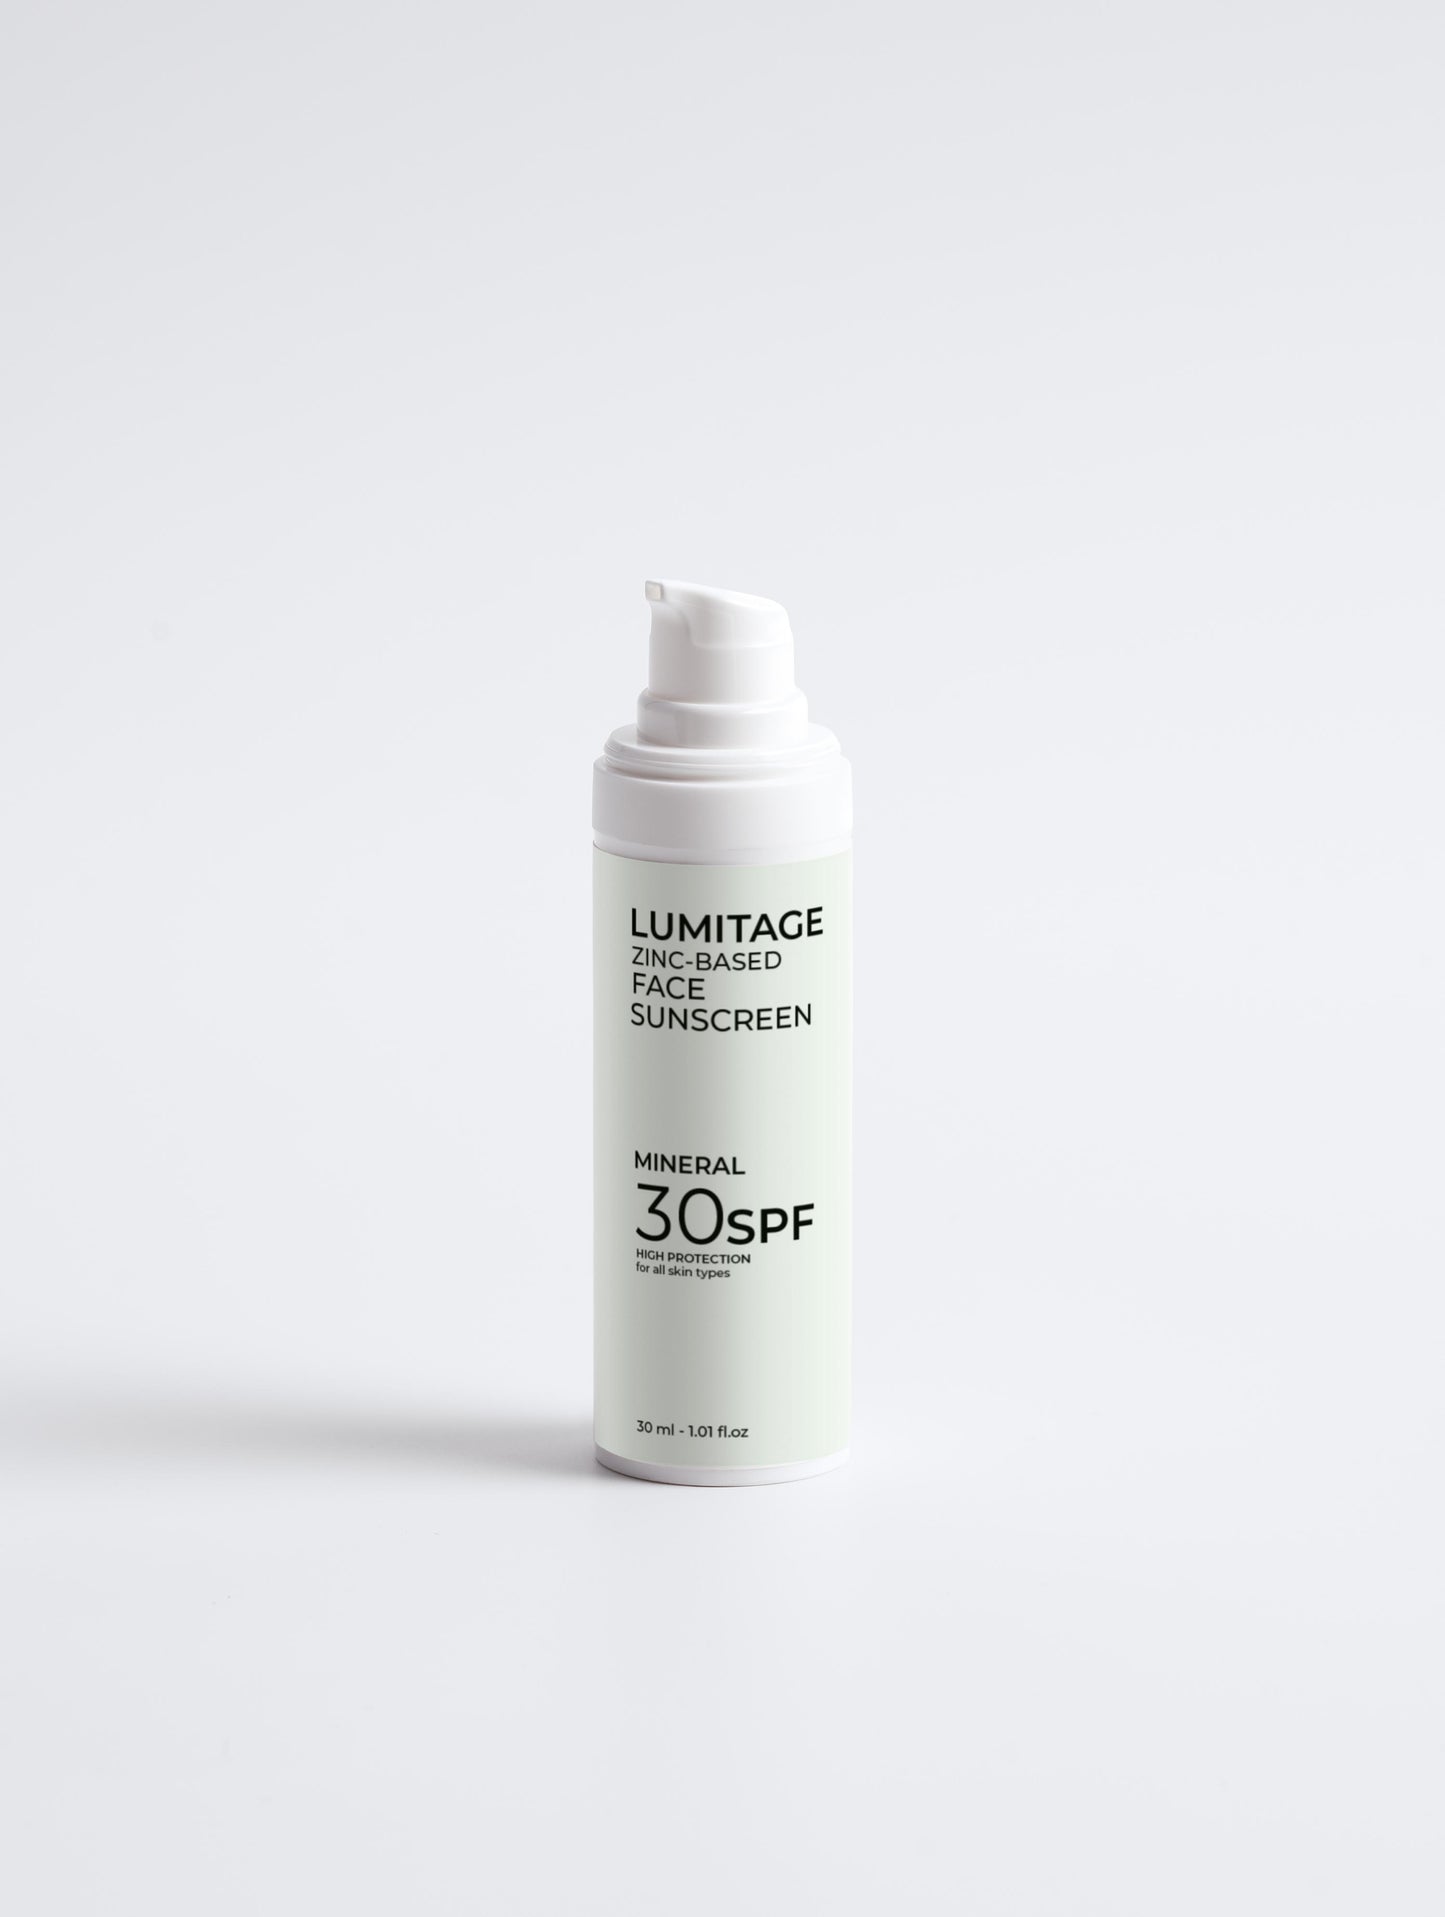 Lumitage sunscreen - the zinc-based organic sunscreen for daily facial use.